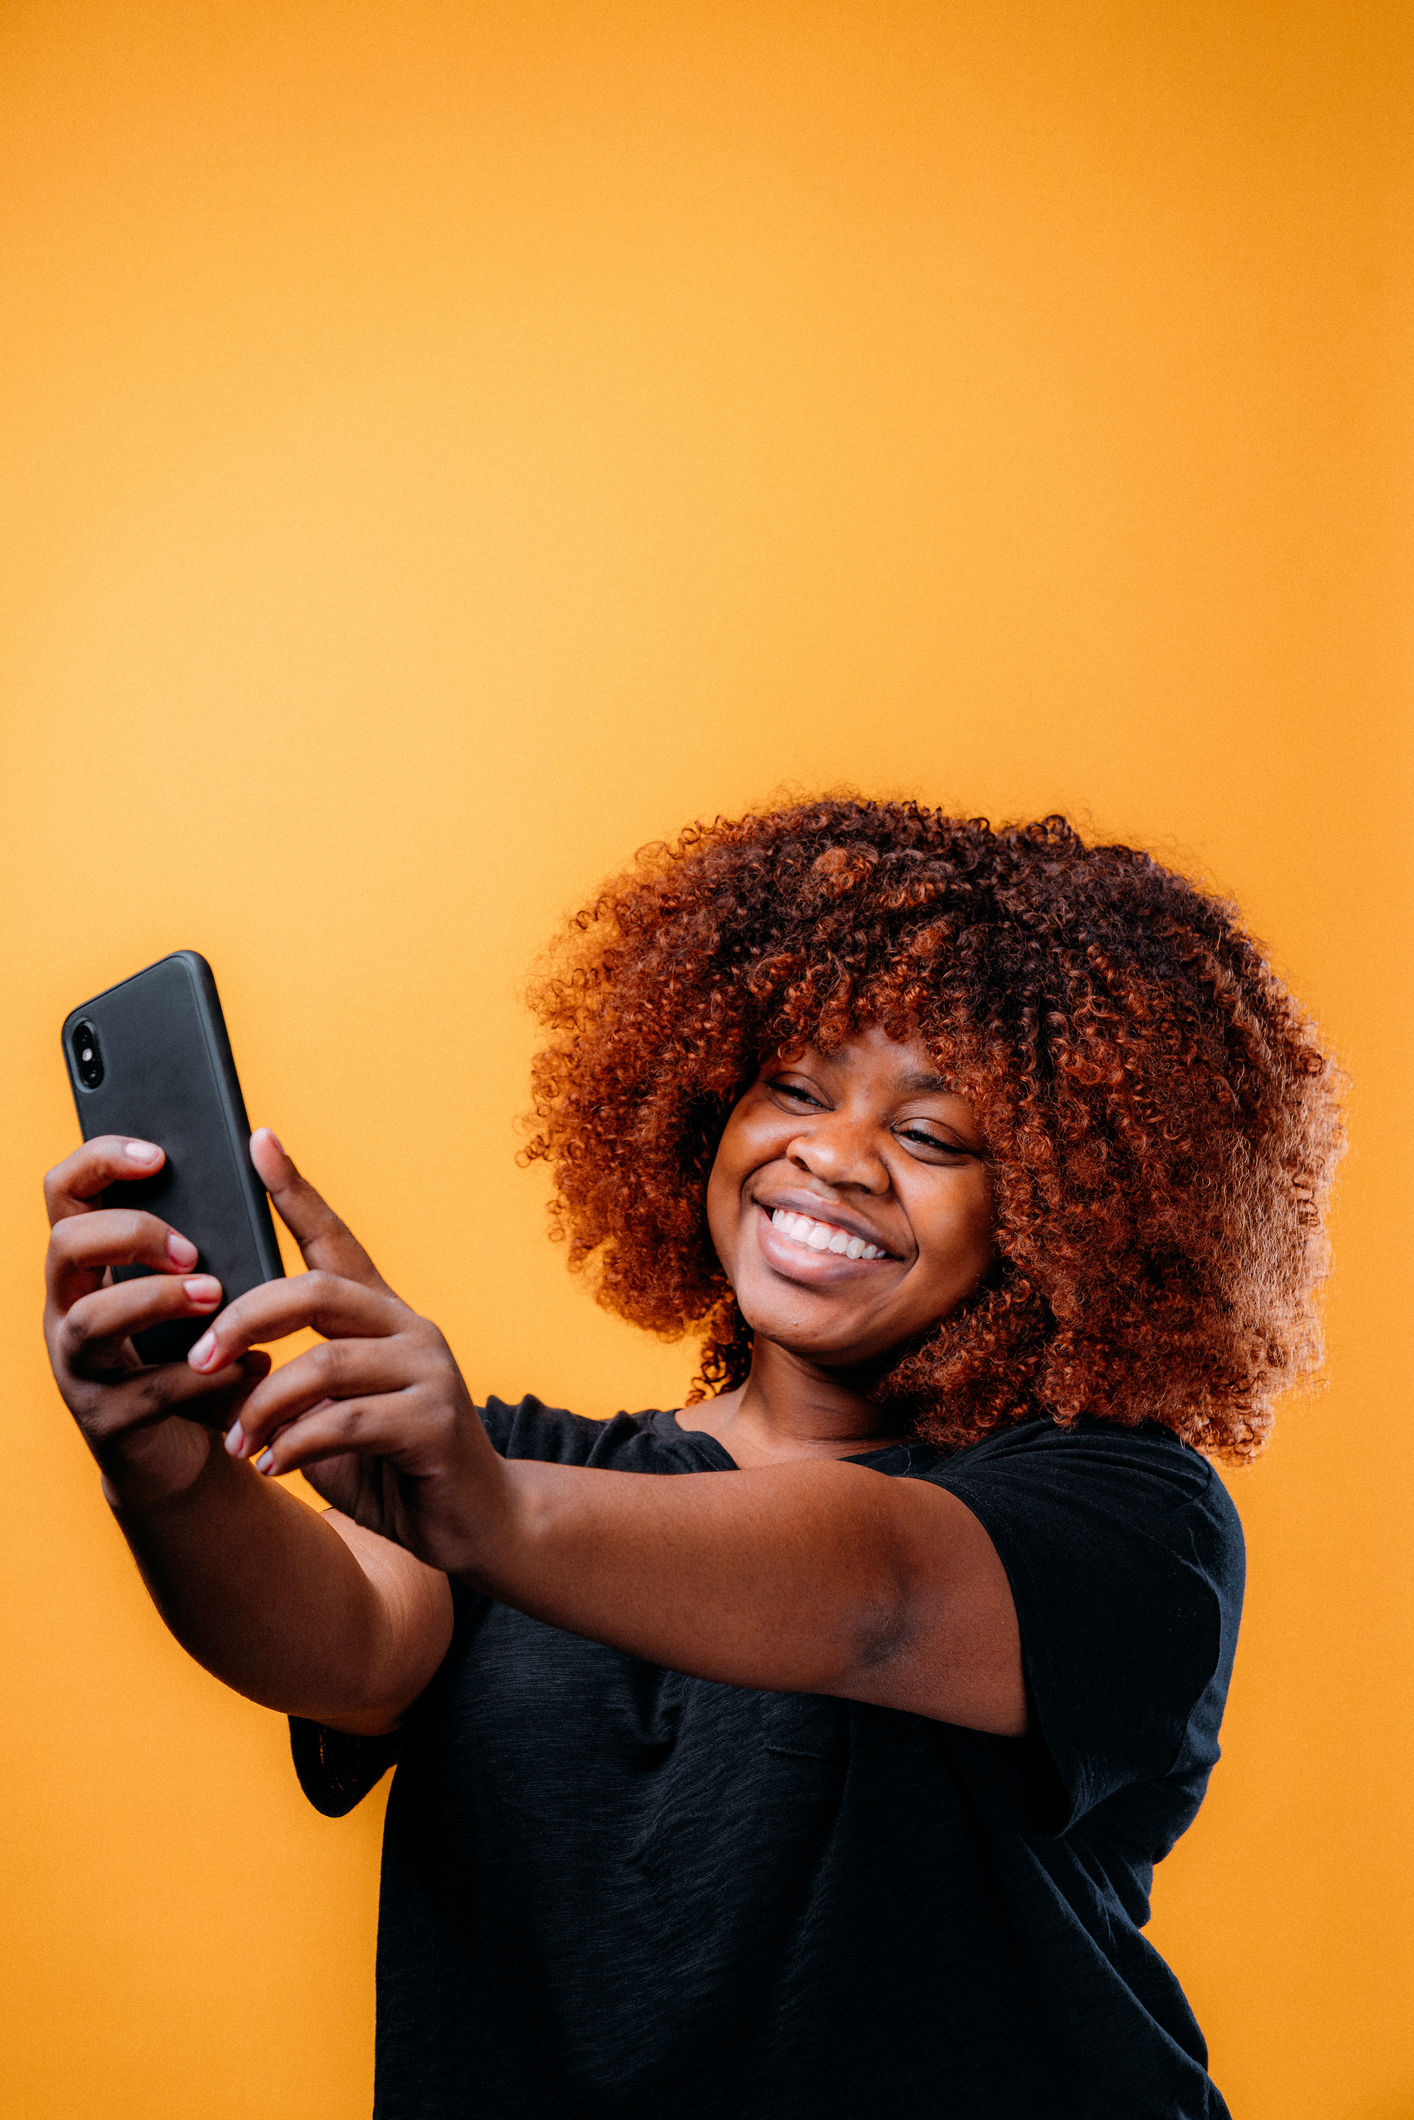 Studio Portrait of a Confident, Beautiful Young African American Woman Using a Mobile Handheld Smartphone to Snap a Selfie Photo for Social Media in Front of a Happy Mustard Yellow-Colored Background